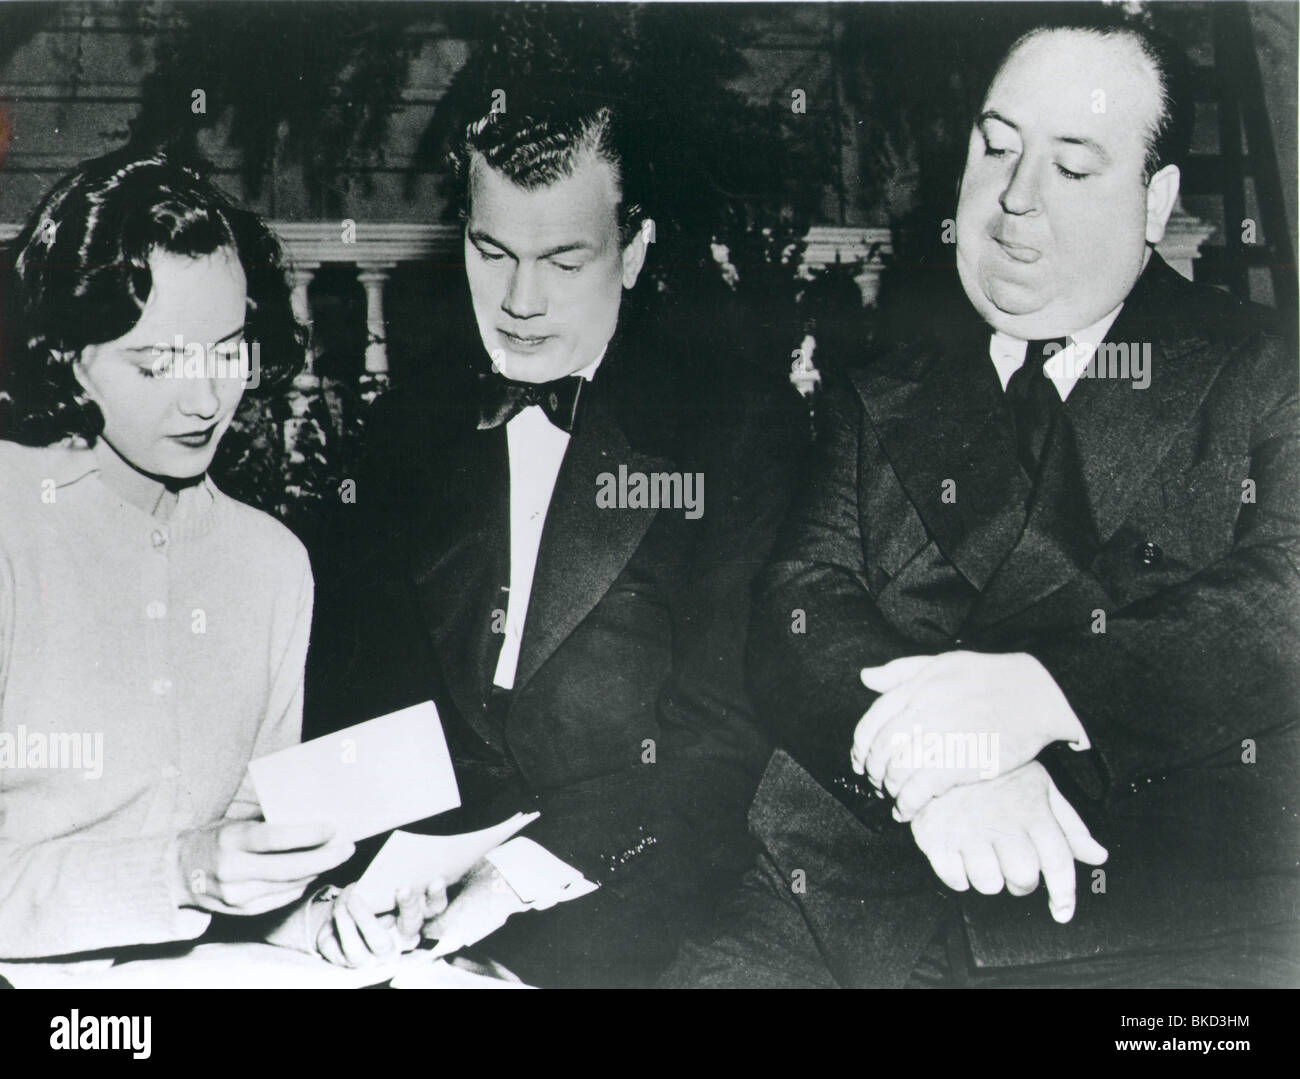 ALFRED HITCHCOCK (DIR) O/S 'SHADOW OF A DOUBT' (1943) WITH TERESA WRIGHT, JOSEPH COTTEN ALH 042P Stock Photo